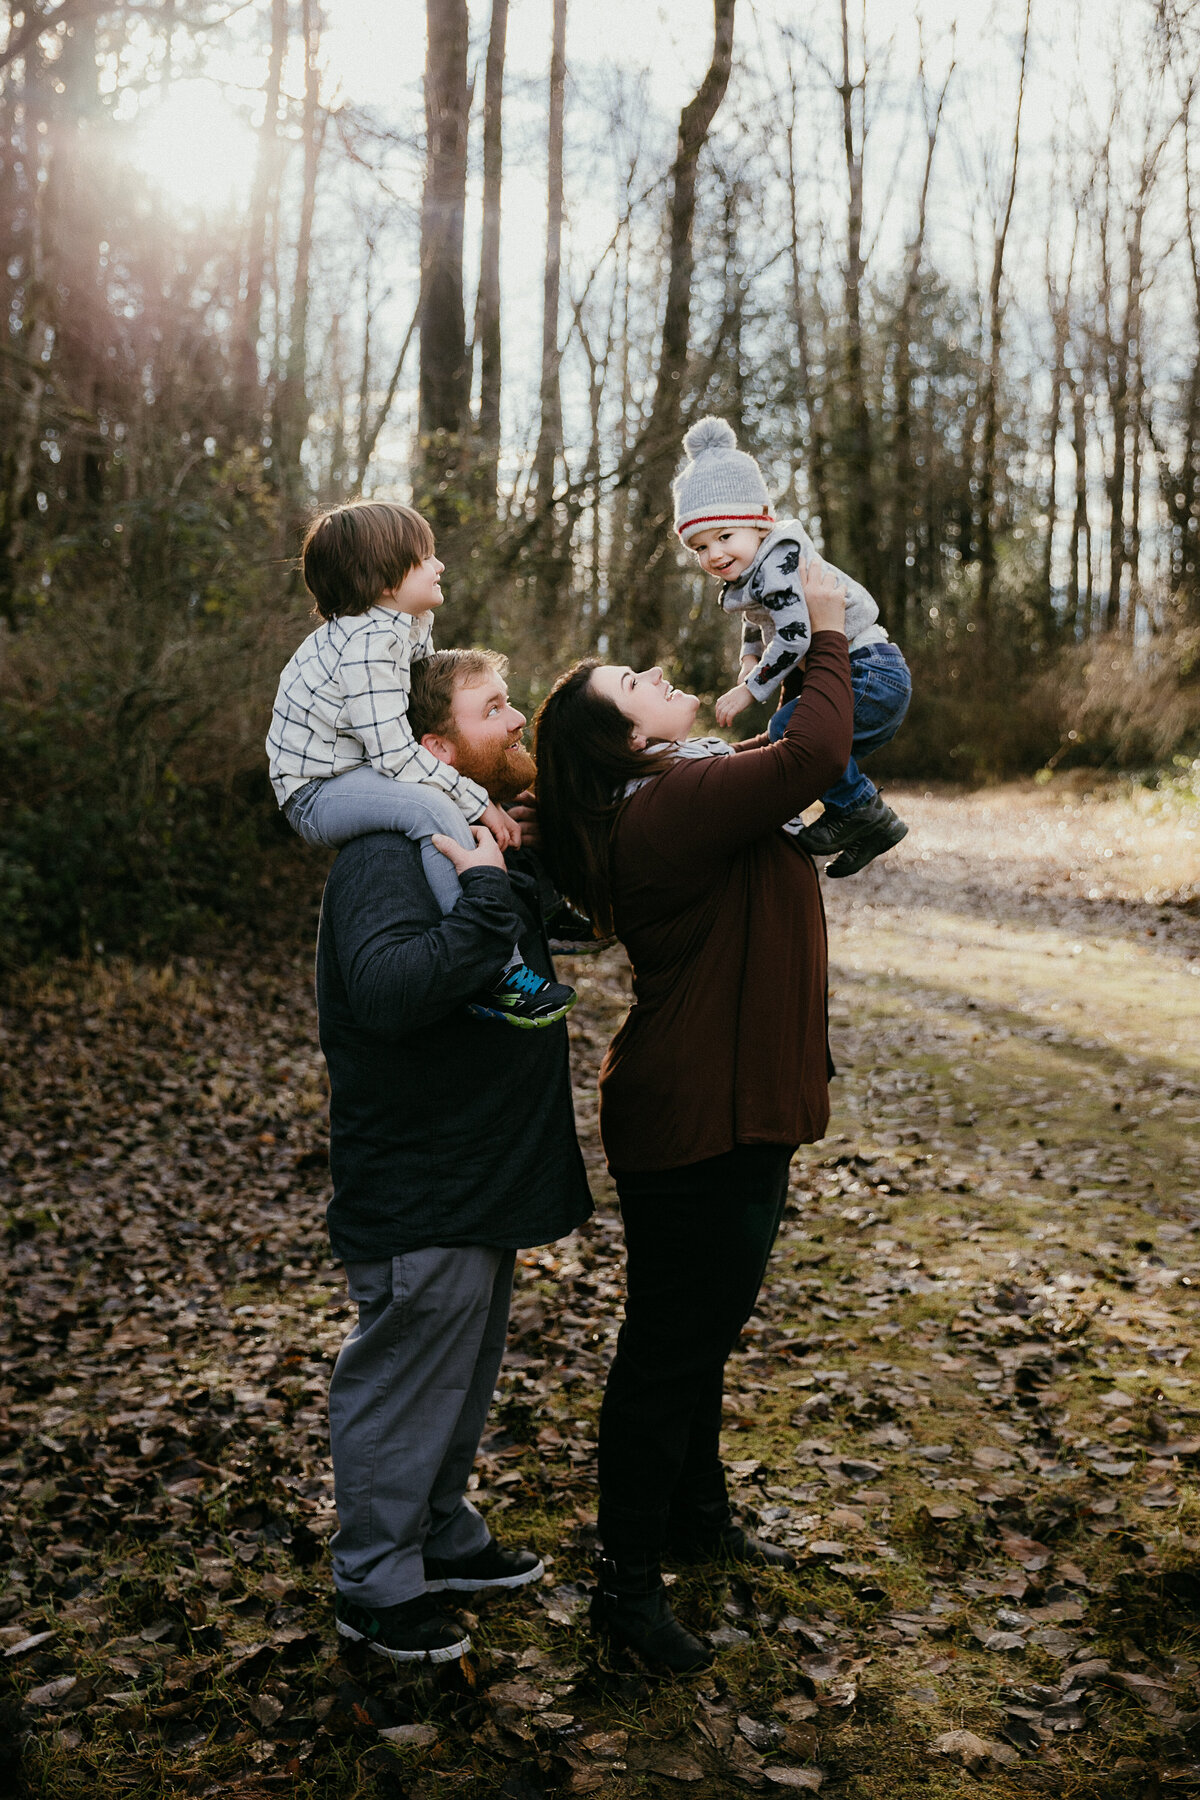 Fraser Valley Chilliwack Family Photography Portrait Session